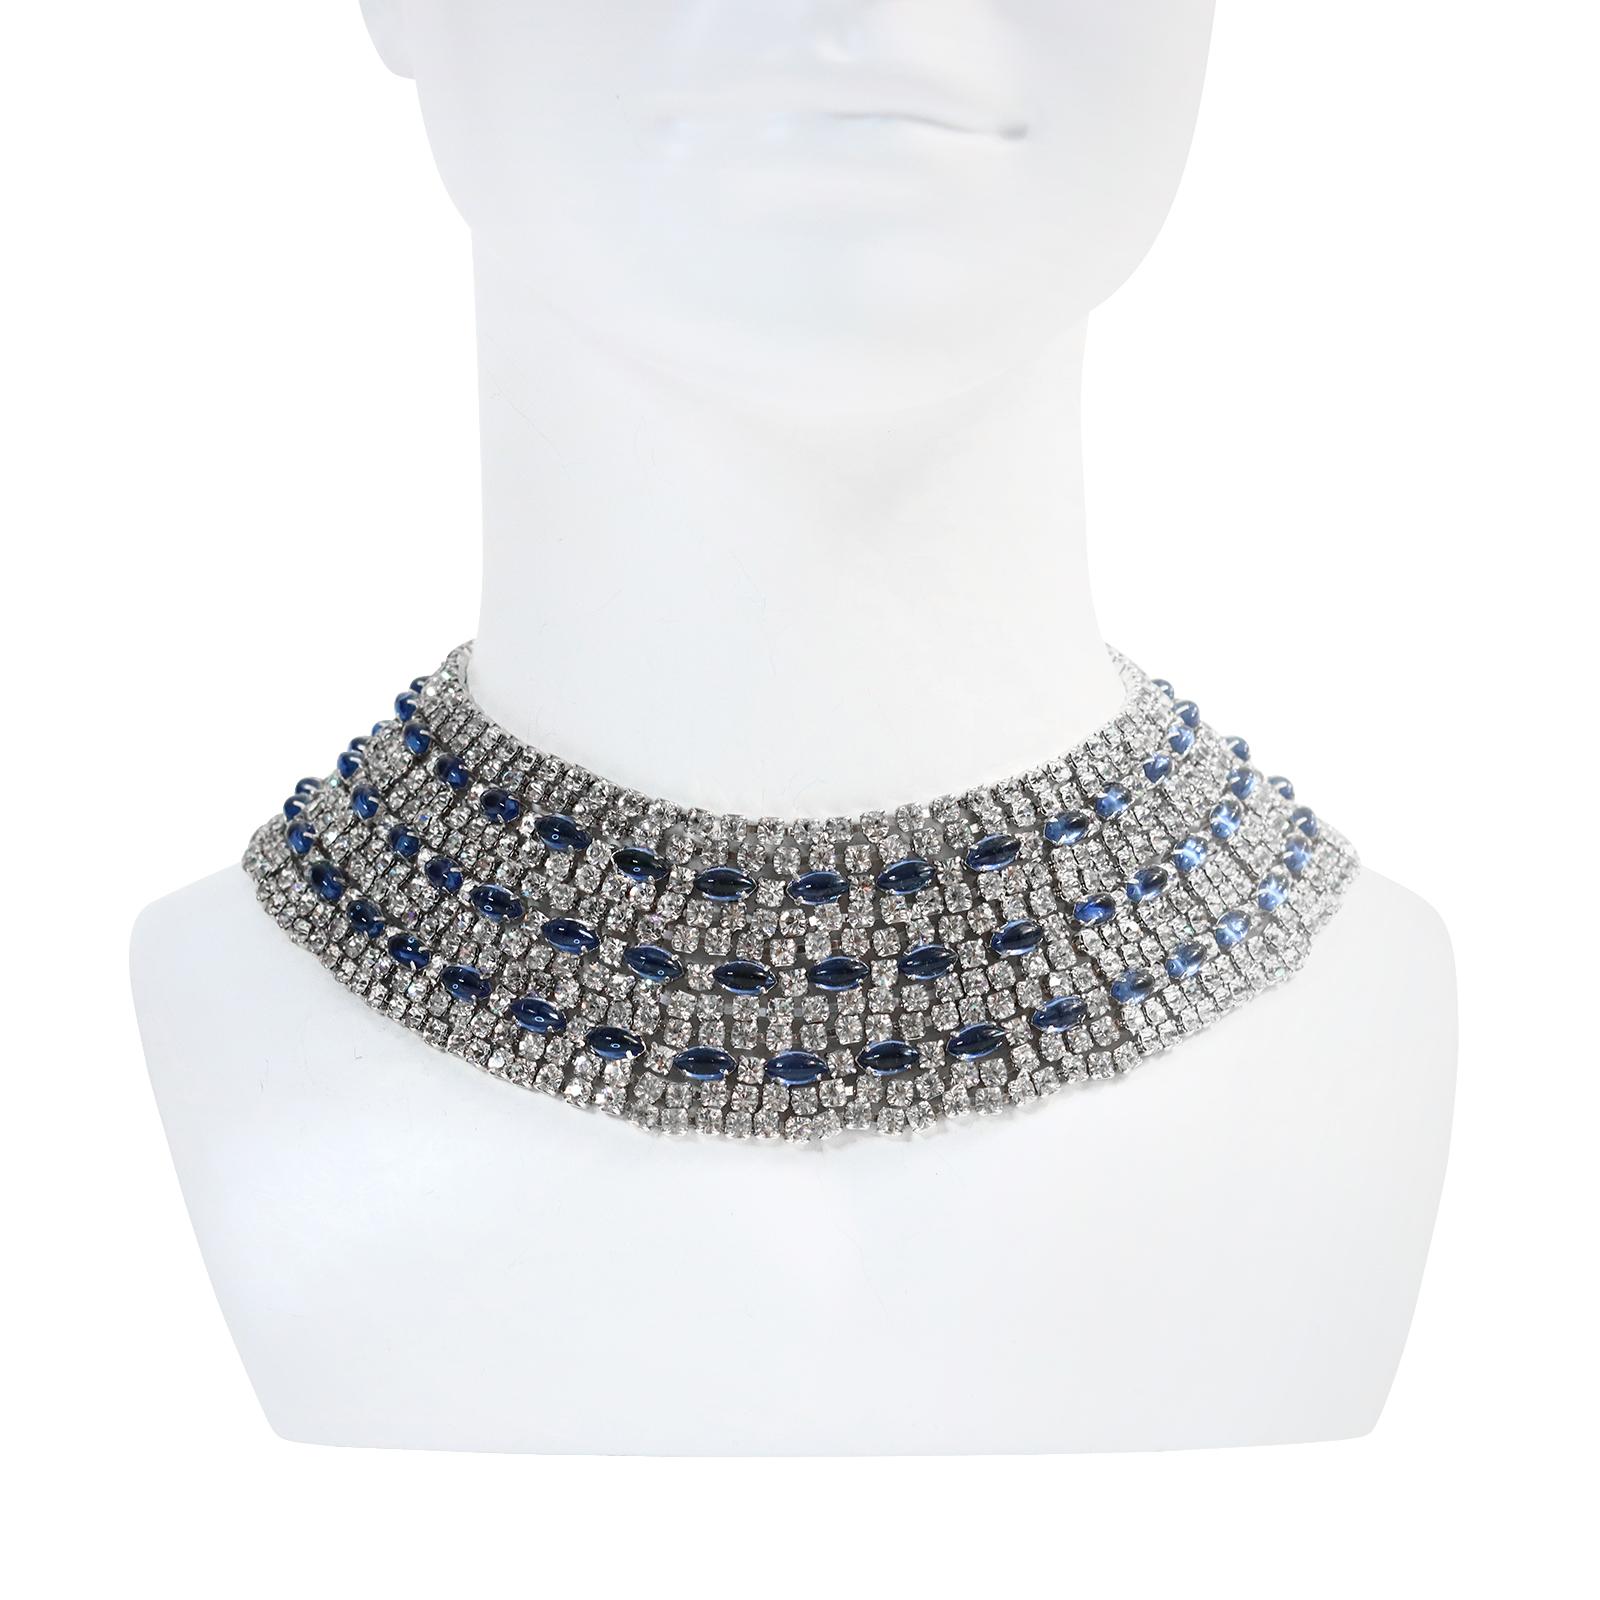 Vintage Hattie Carnegie Diamante and Sapphire Blue Cabochon Wide Collar Necklace Circa 1960s. Gorgeous Piece from the 1960s. This is truly such a beautiful piece.  I have some smaller pieces that are lovely in gold and silver but this one just has a